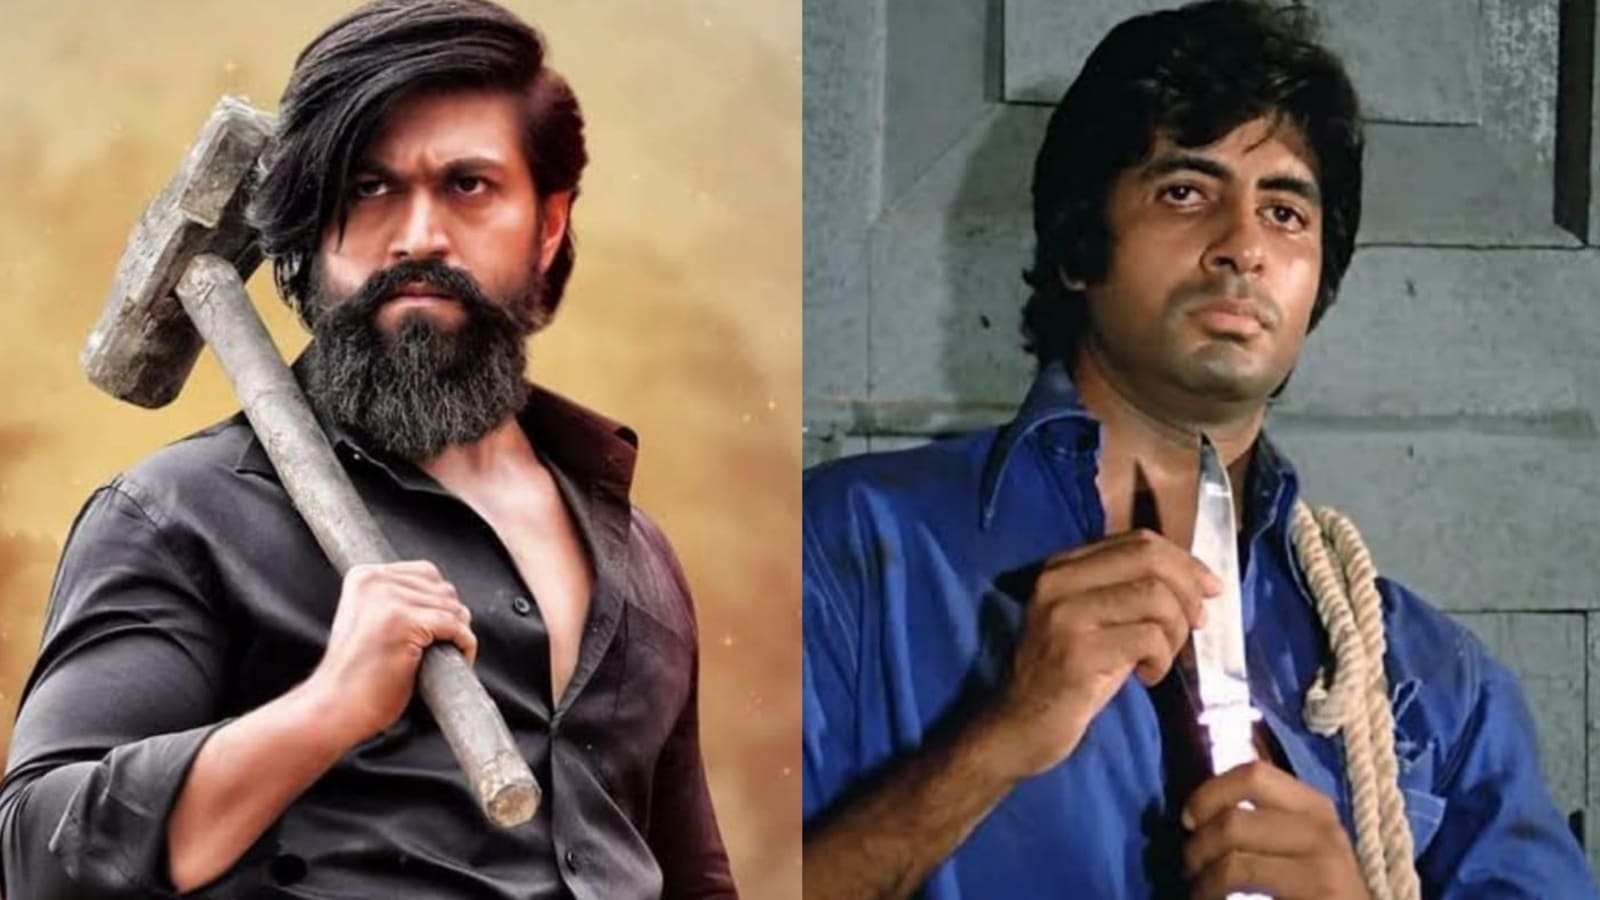 Producer Vijay Kiragandur says Yash likely to be replaced in 'KGF' franchise